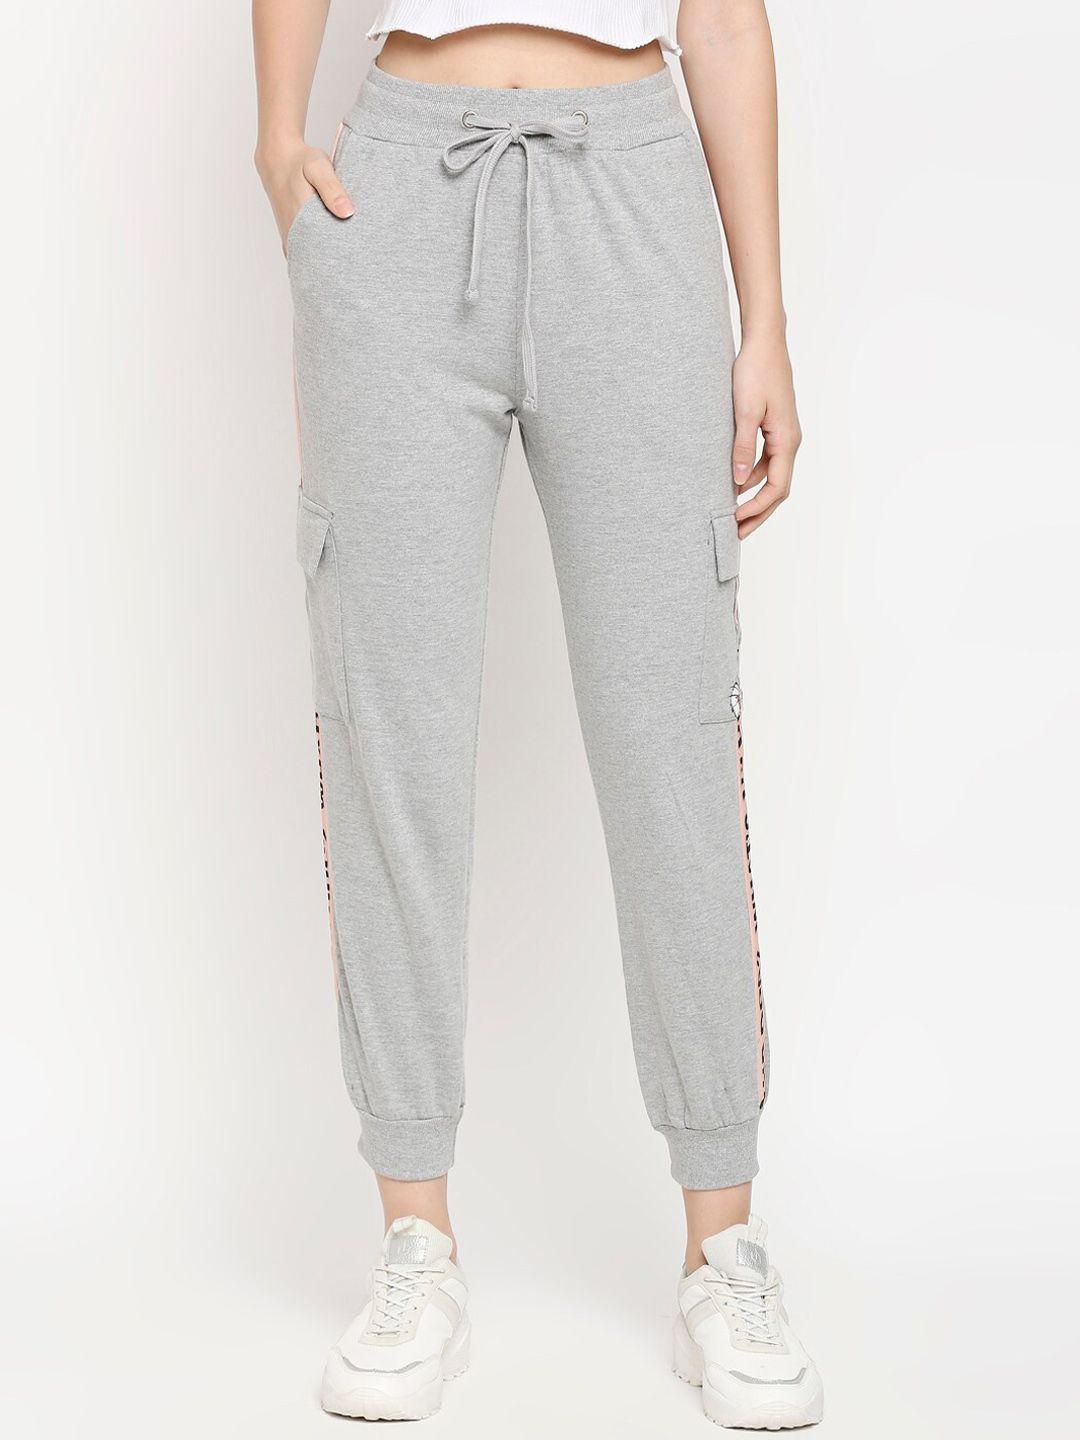 the souled store women grey solid pure cotton joggers